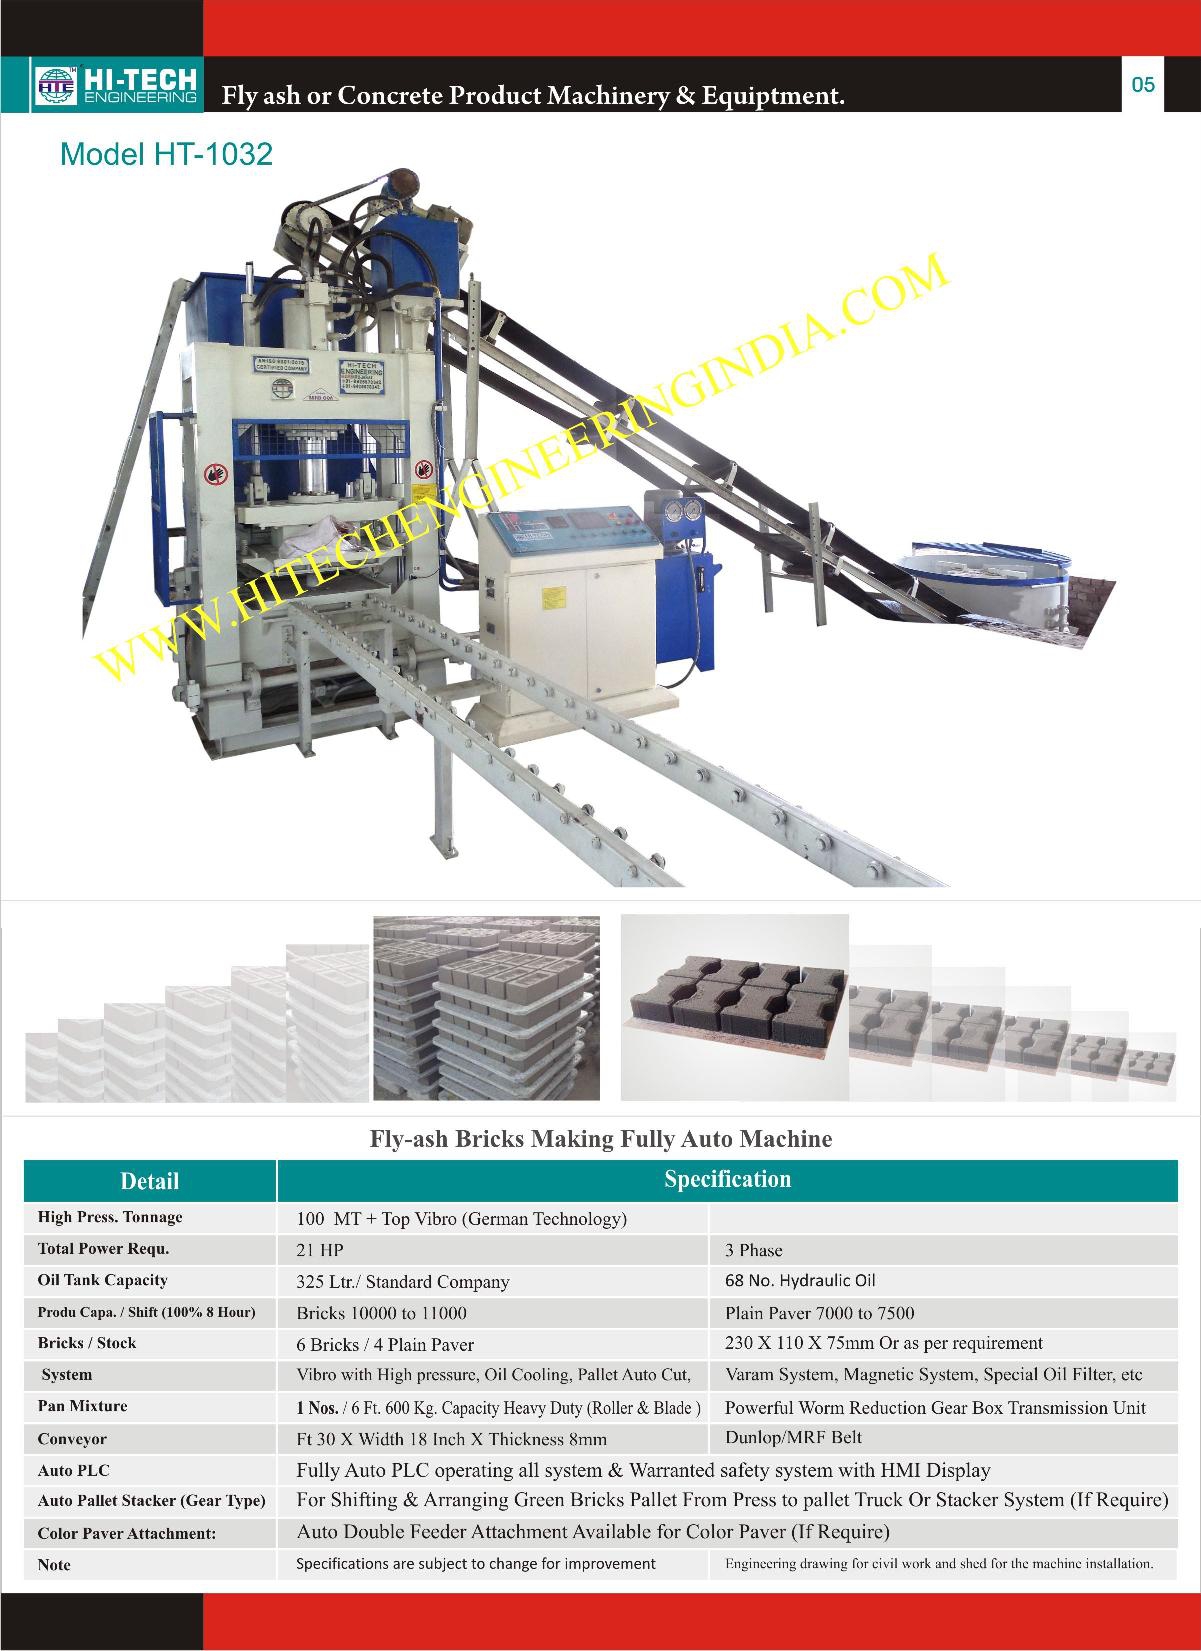 Fly ash bricks making fully auto machine from Hi Tech Engineering